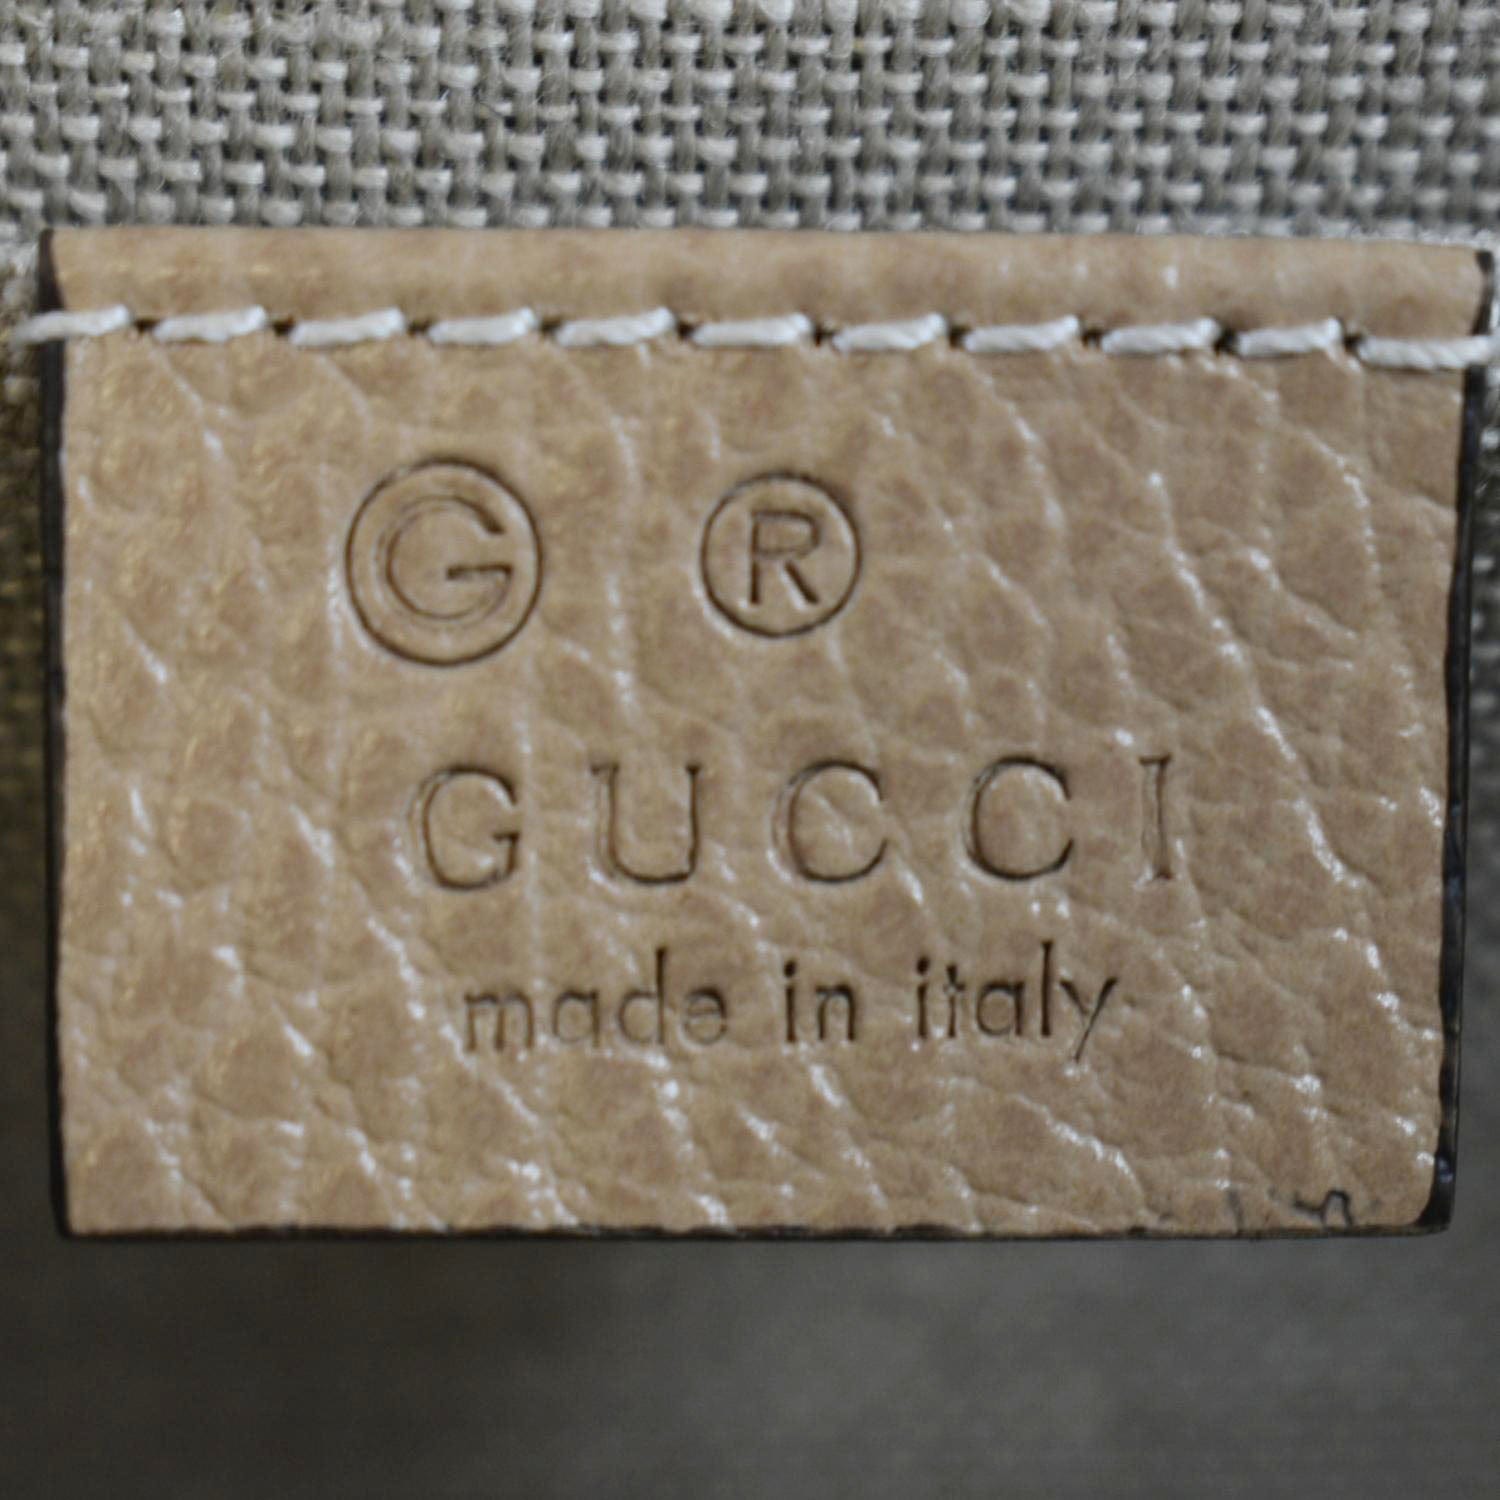 Gucci, Bags, Nib 0 Authentic Gucci Wallet Price Is Firm